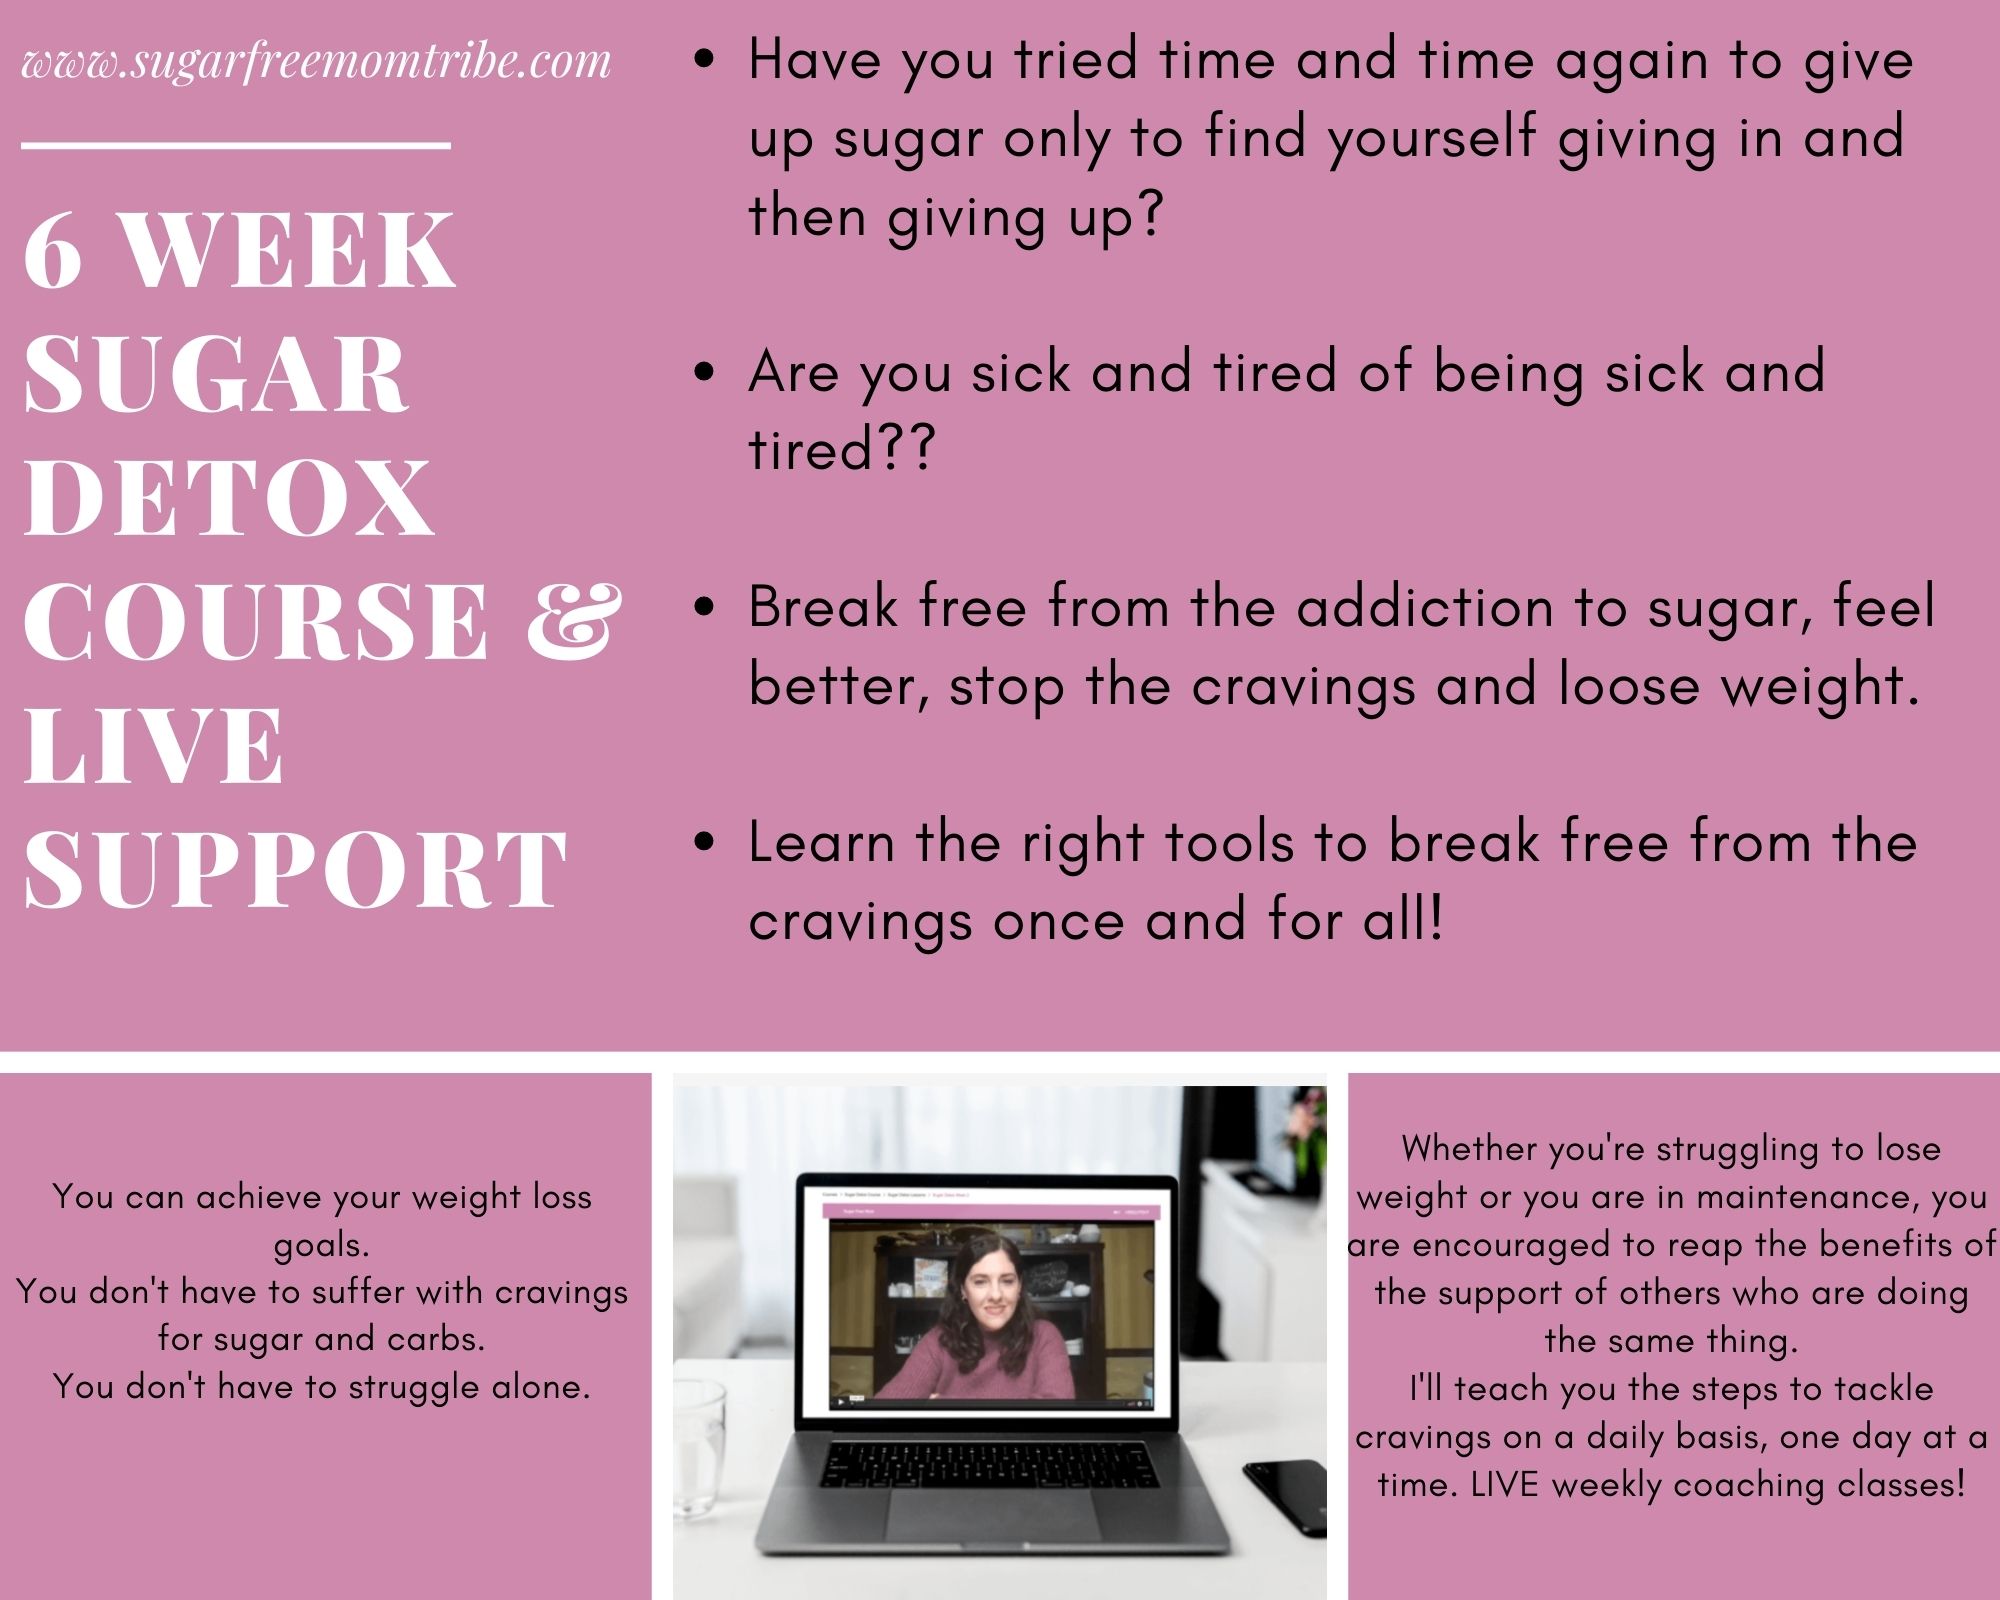 6 Week Sugar Detox Course with Live Weekly Support